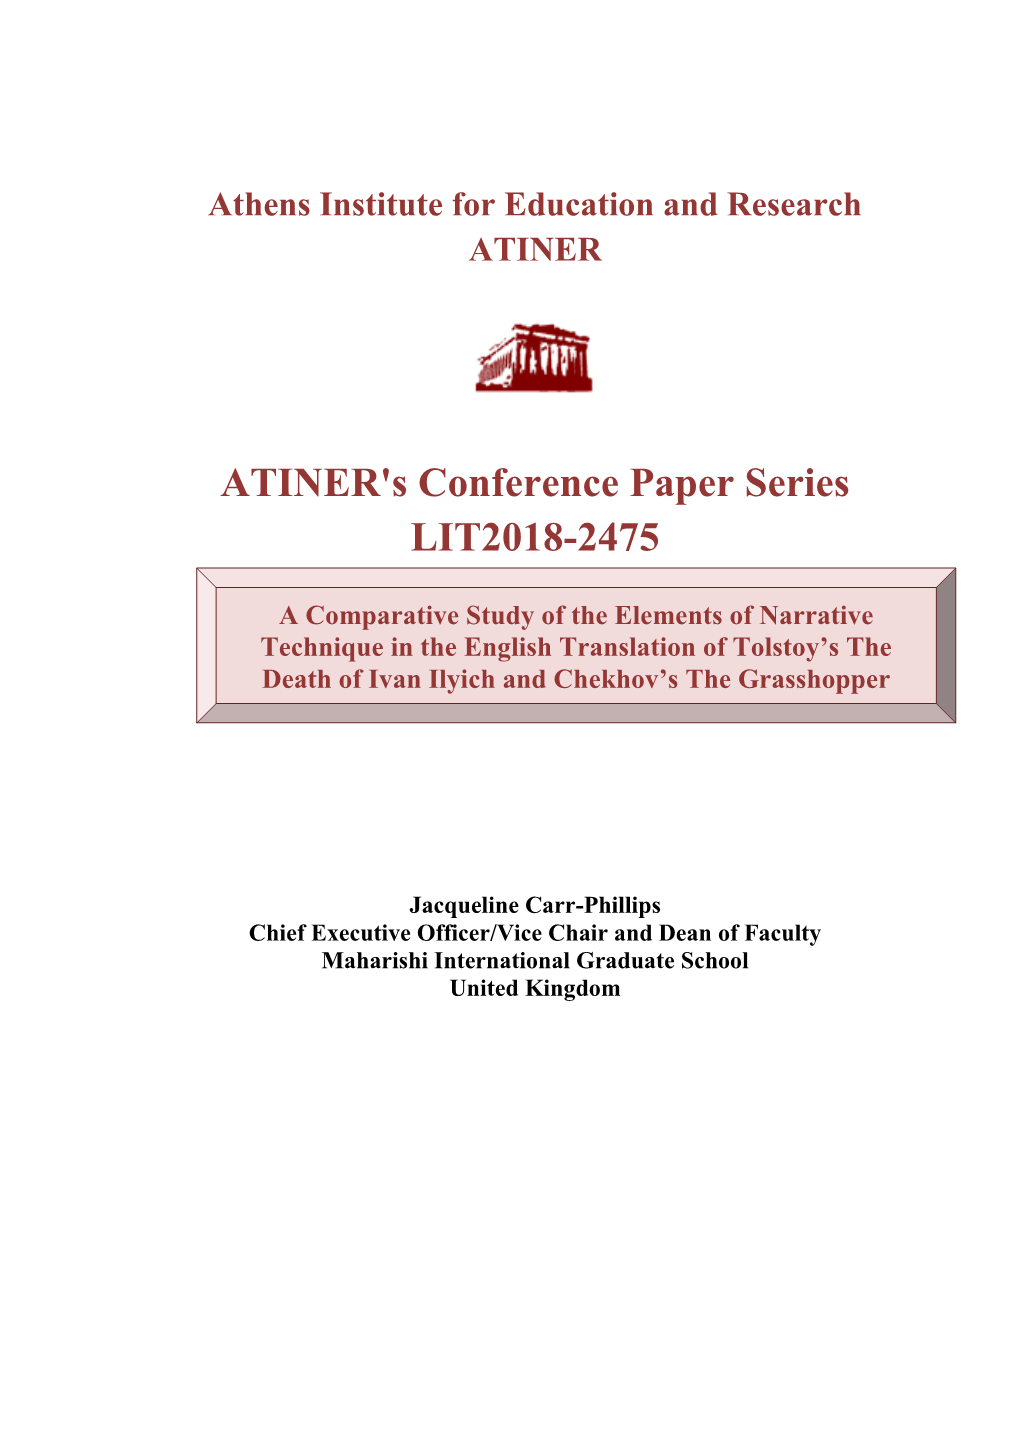 ATINER's Conference Paper Series LIT2018-2475